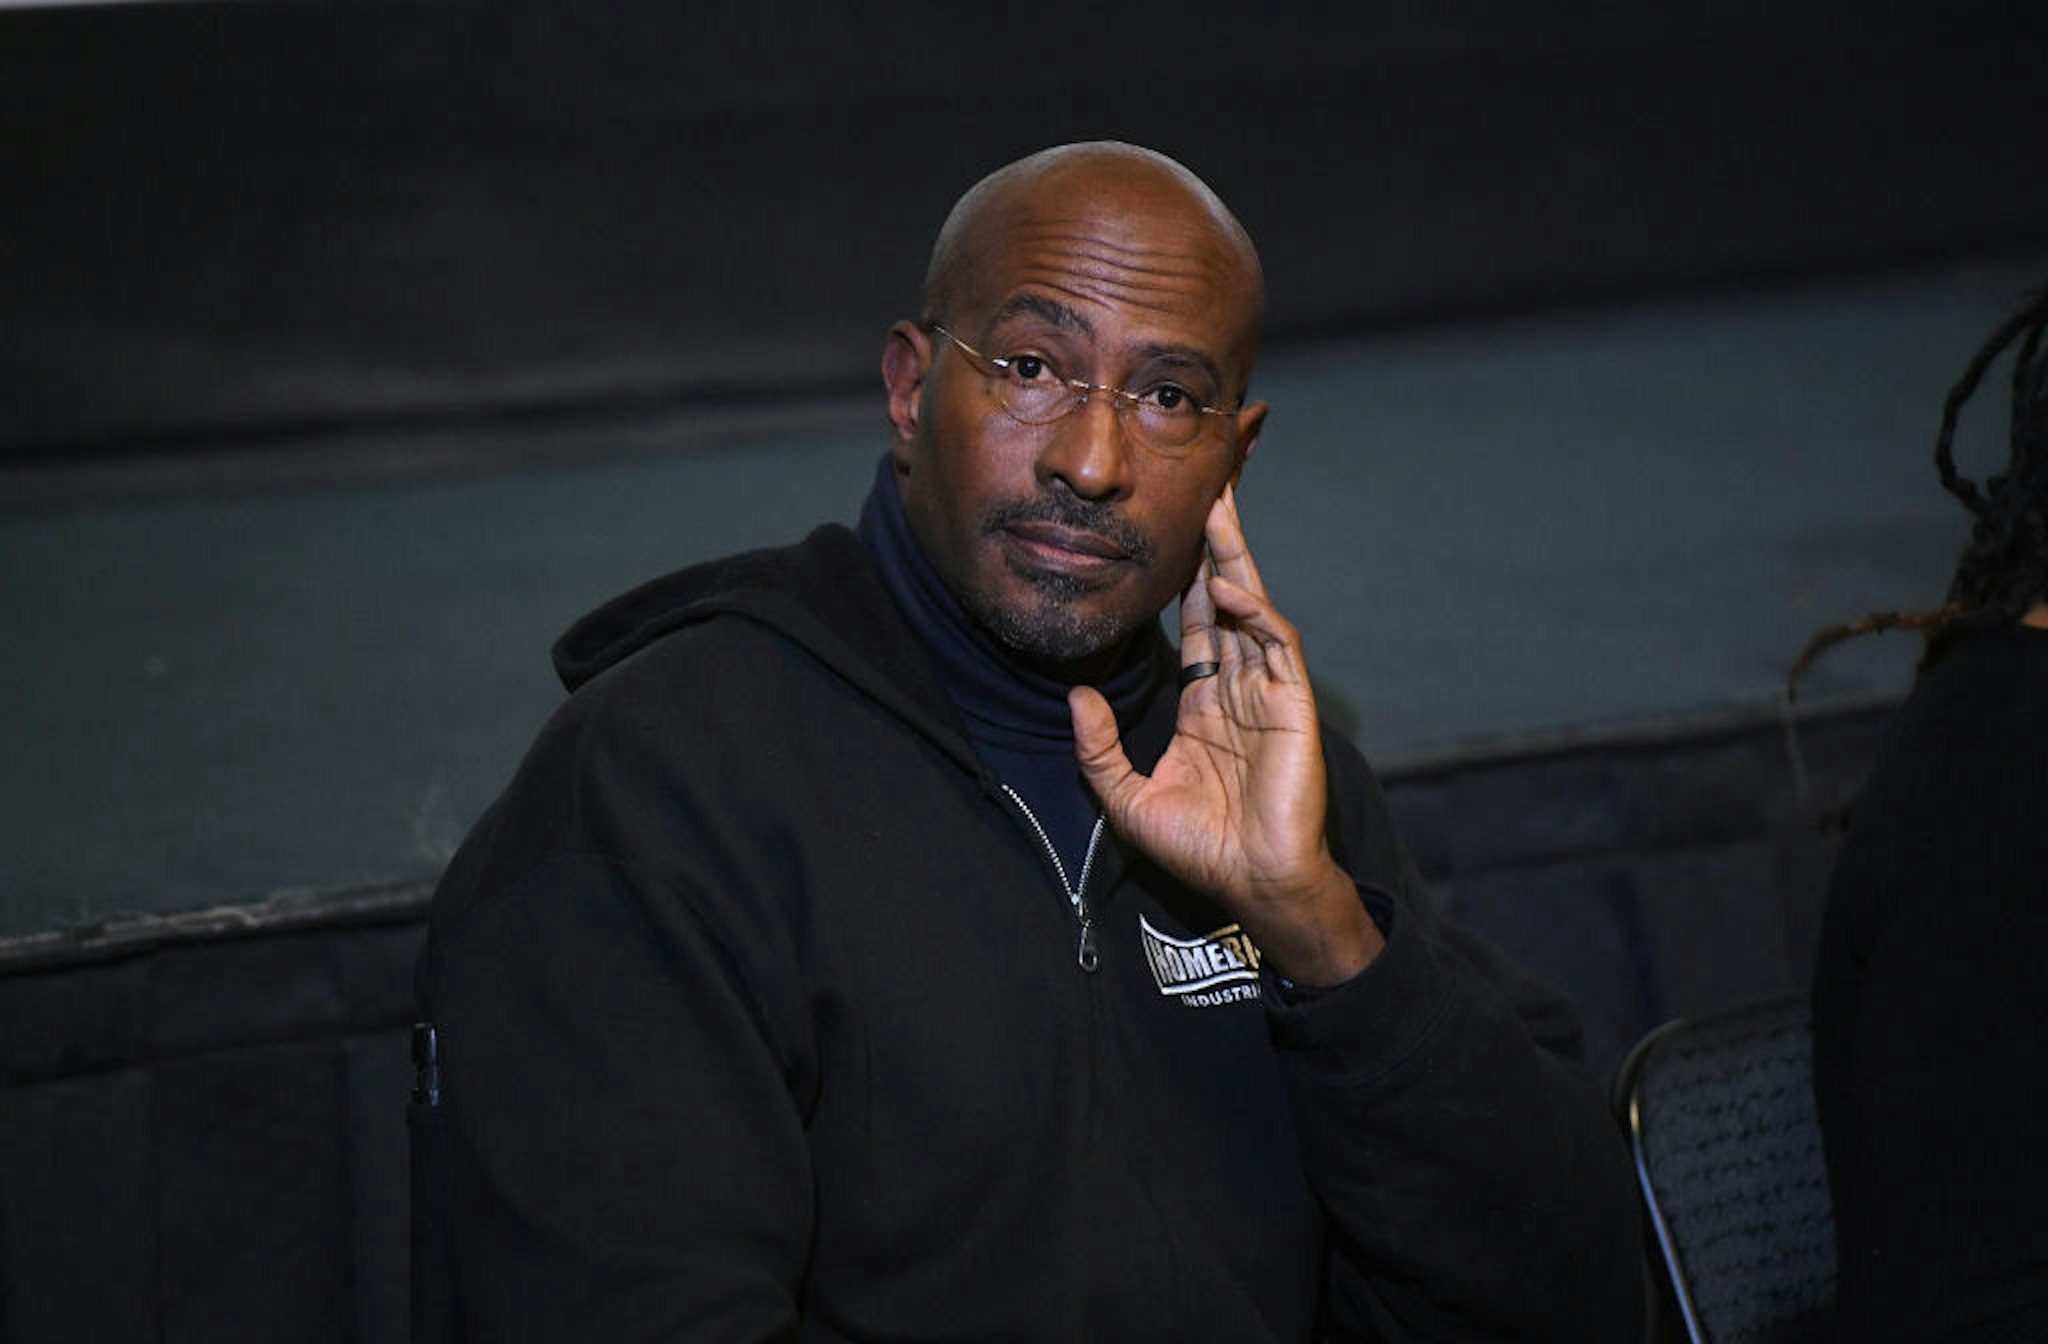 LOS ANGELES, CALIFORNIA - FEBRUARY 25: Van Jones addresses the audience at a panel discussion of "The First Step" at Laemmle Royal on February 25, 2023 in Los Angeles, California. (Photo by Michael Tullberg/Getty Images)